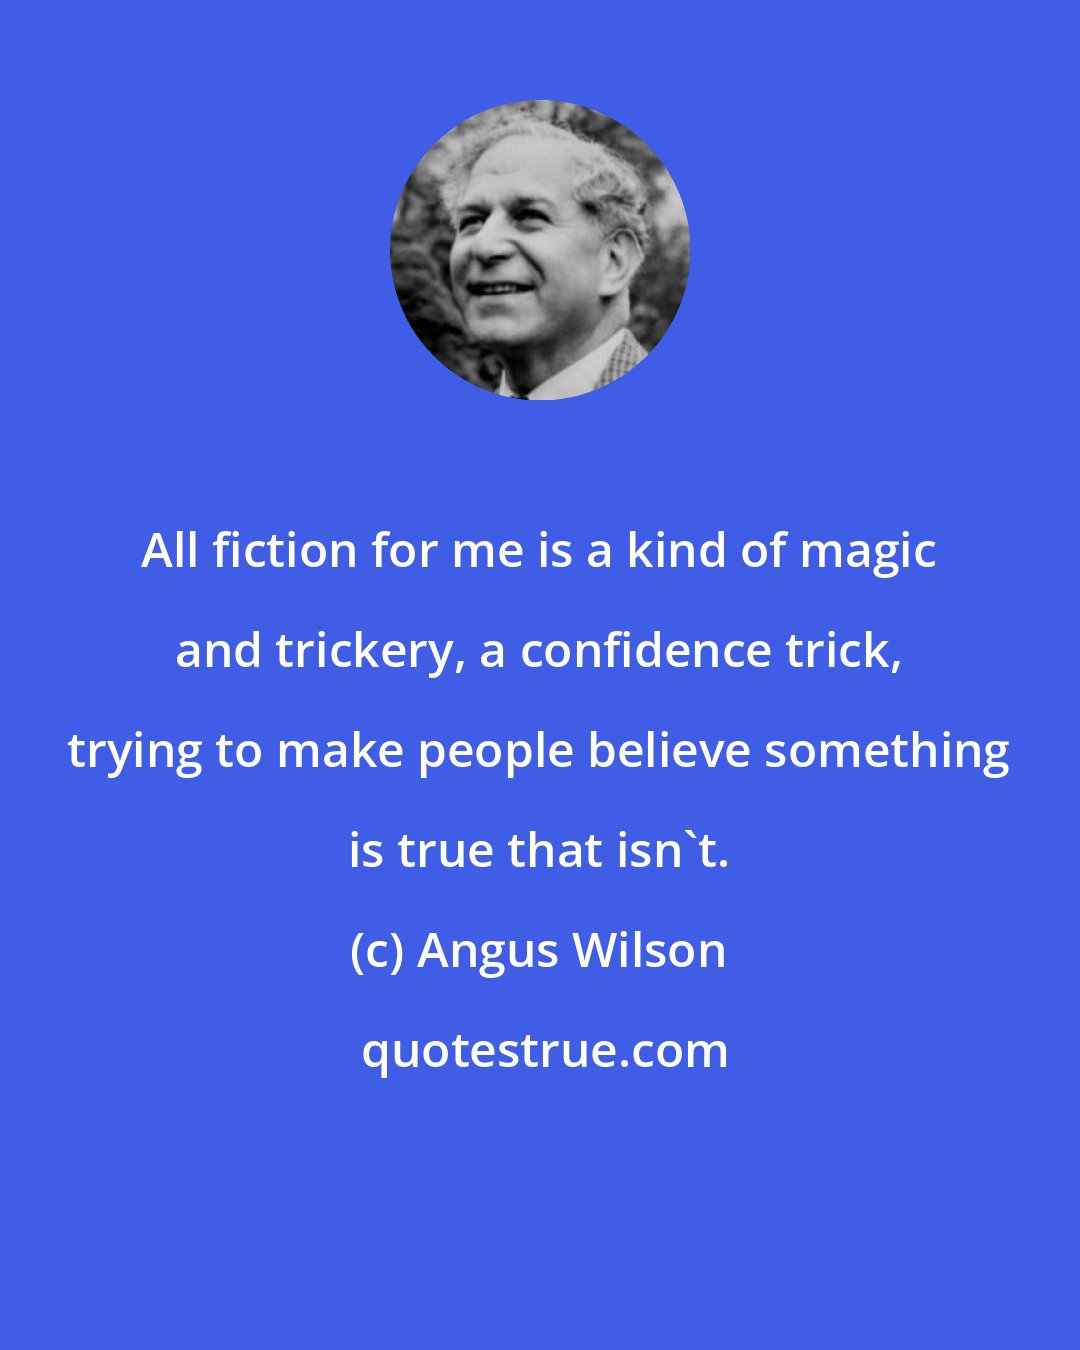 Angus Wilson: All fiction for me is a kind of magic and trickery, a confidence trick, trying to make people believe something is true that isn't.